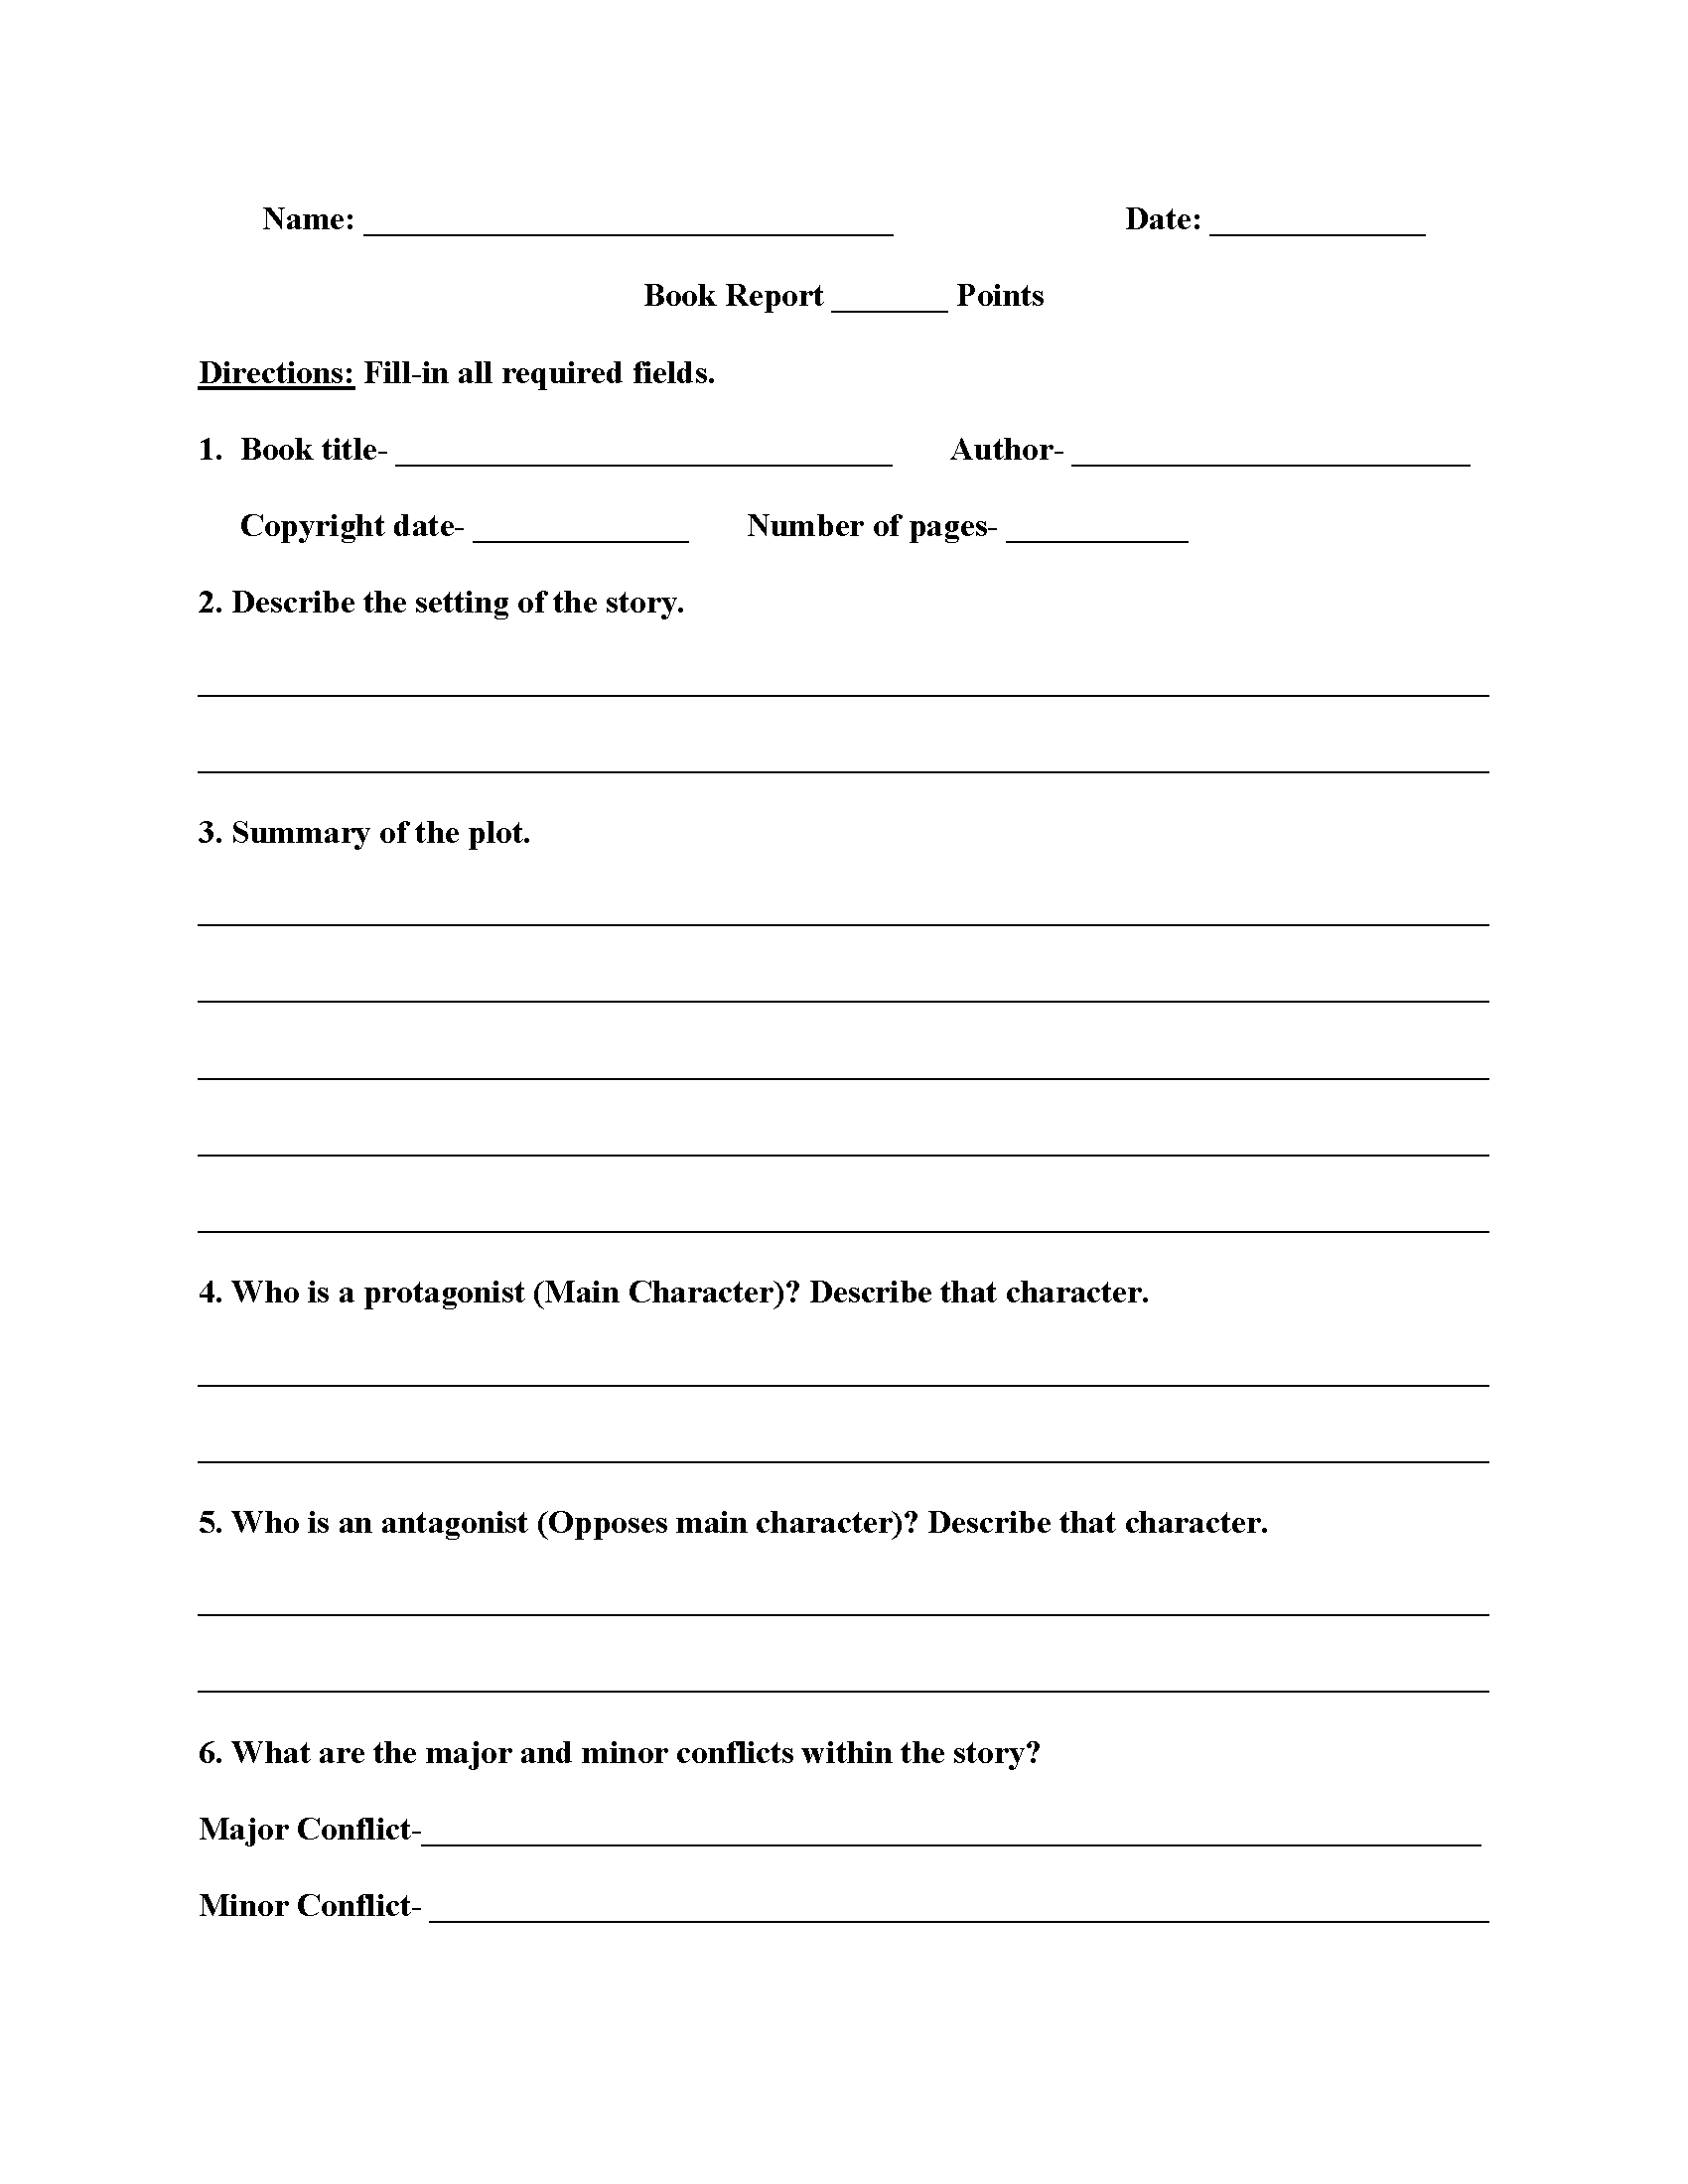 High School Book Report Worksheets  Education  High School Books throughout High School Book Report Template